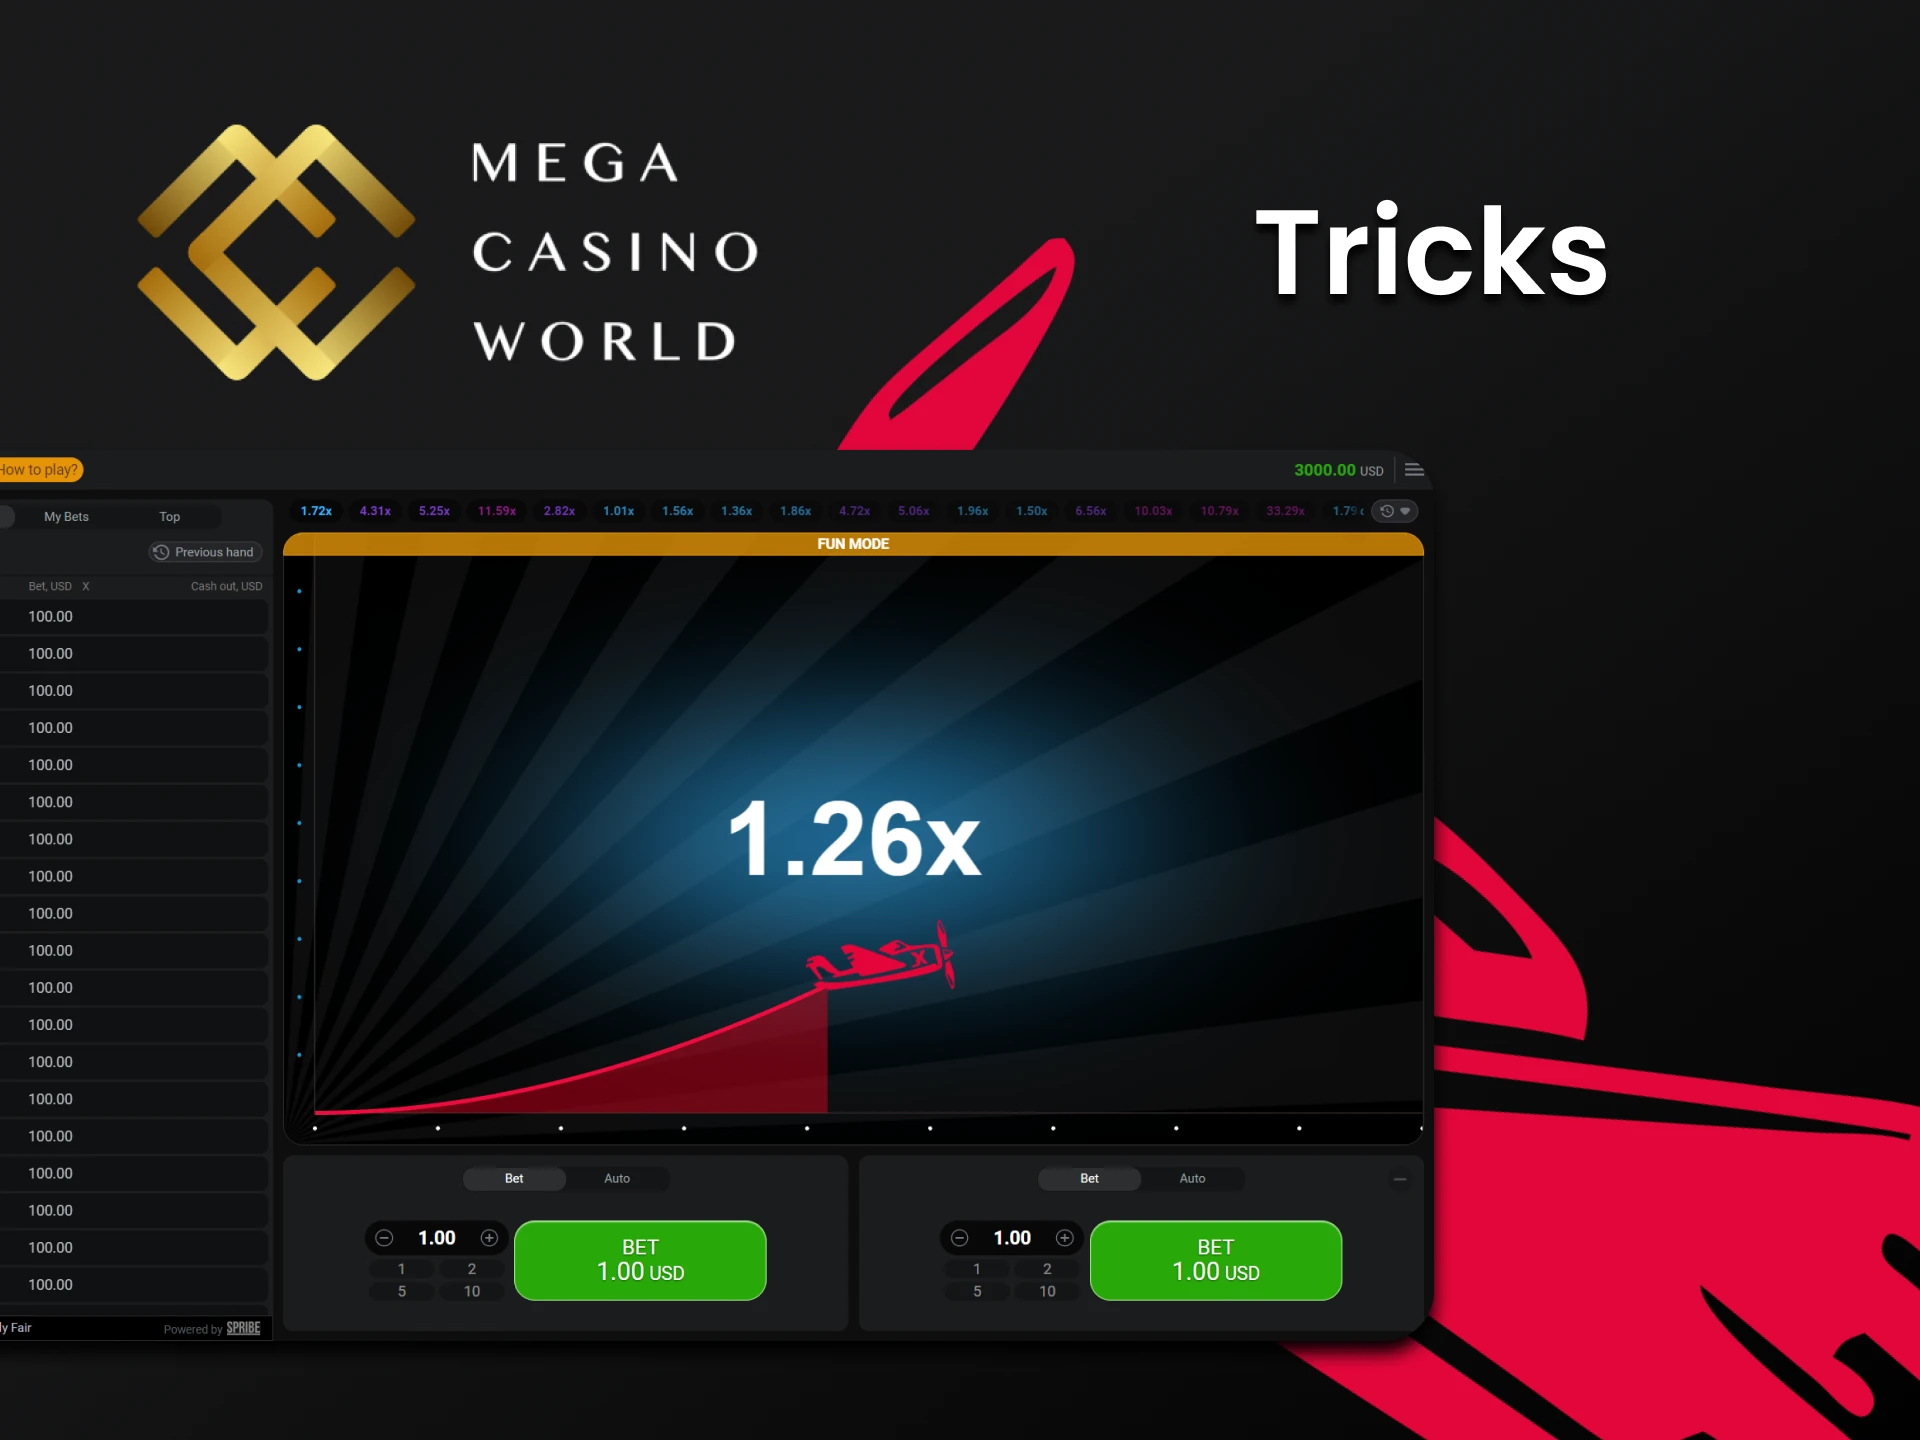 To win in Aviator, learn tricks at the MCW casino.